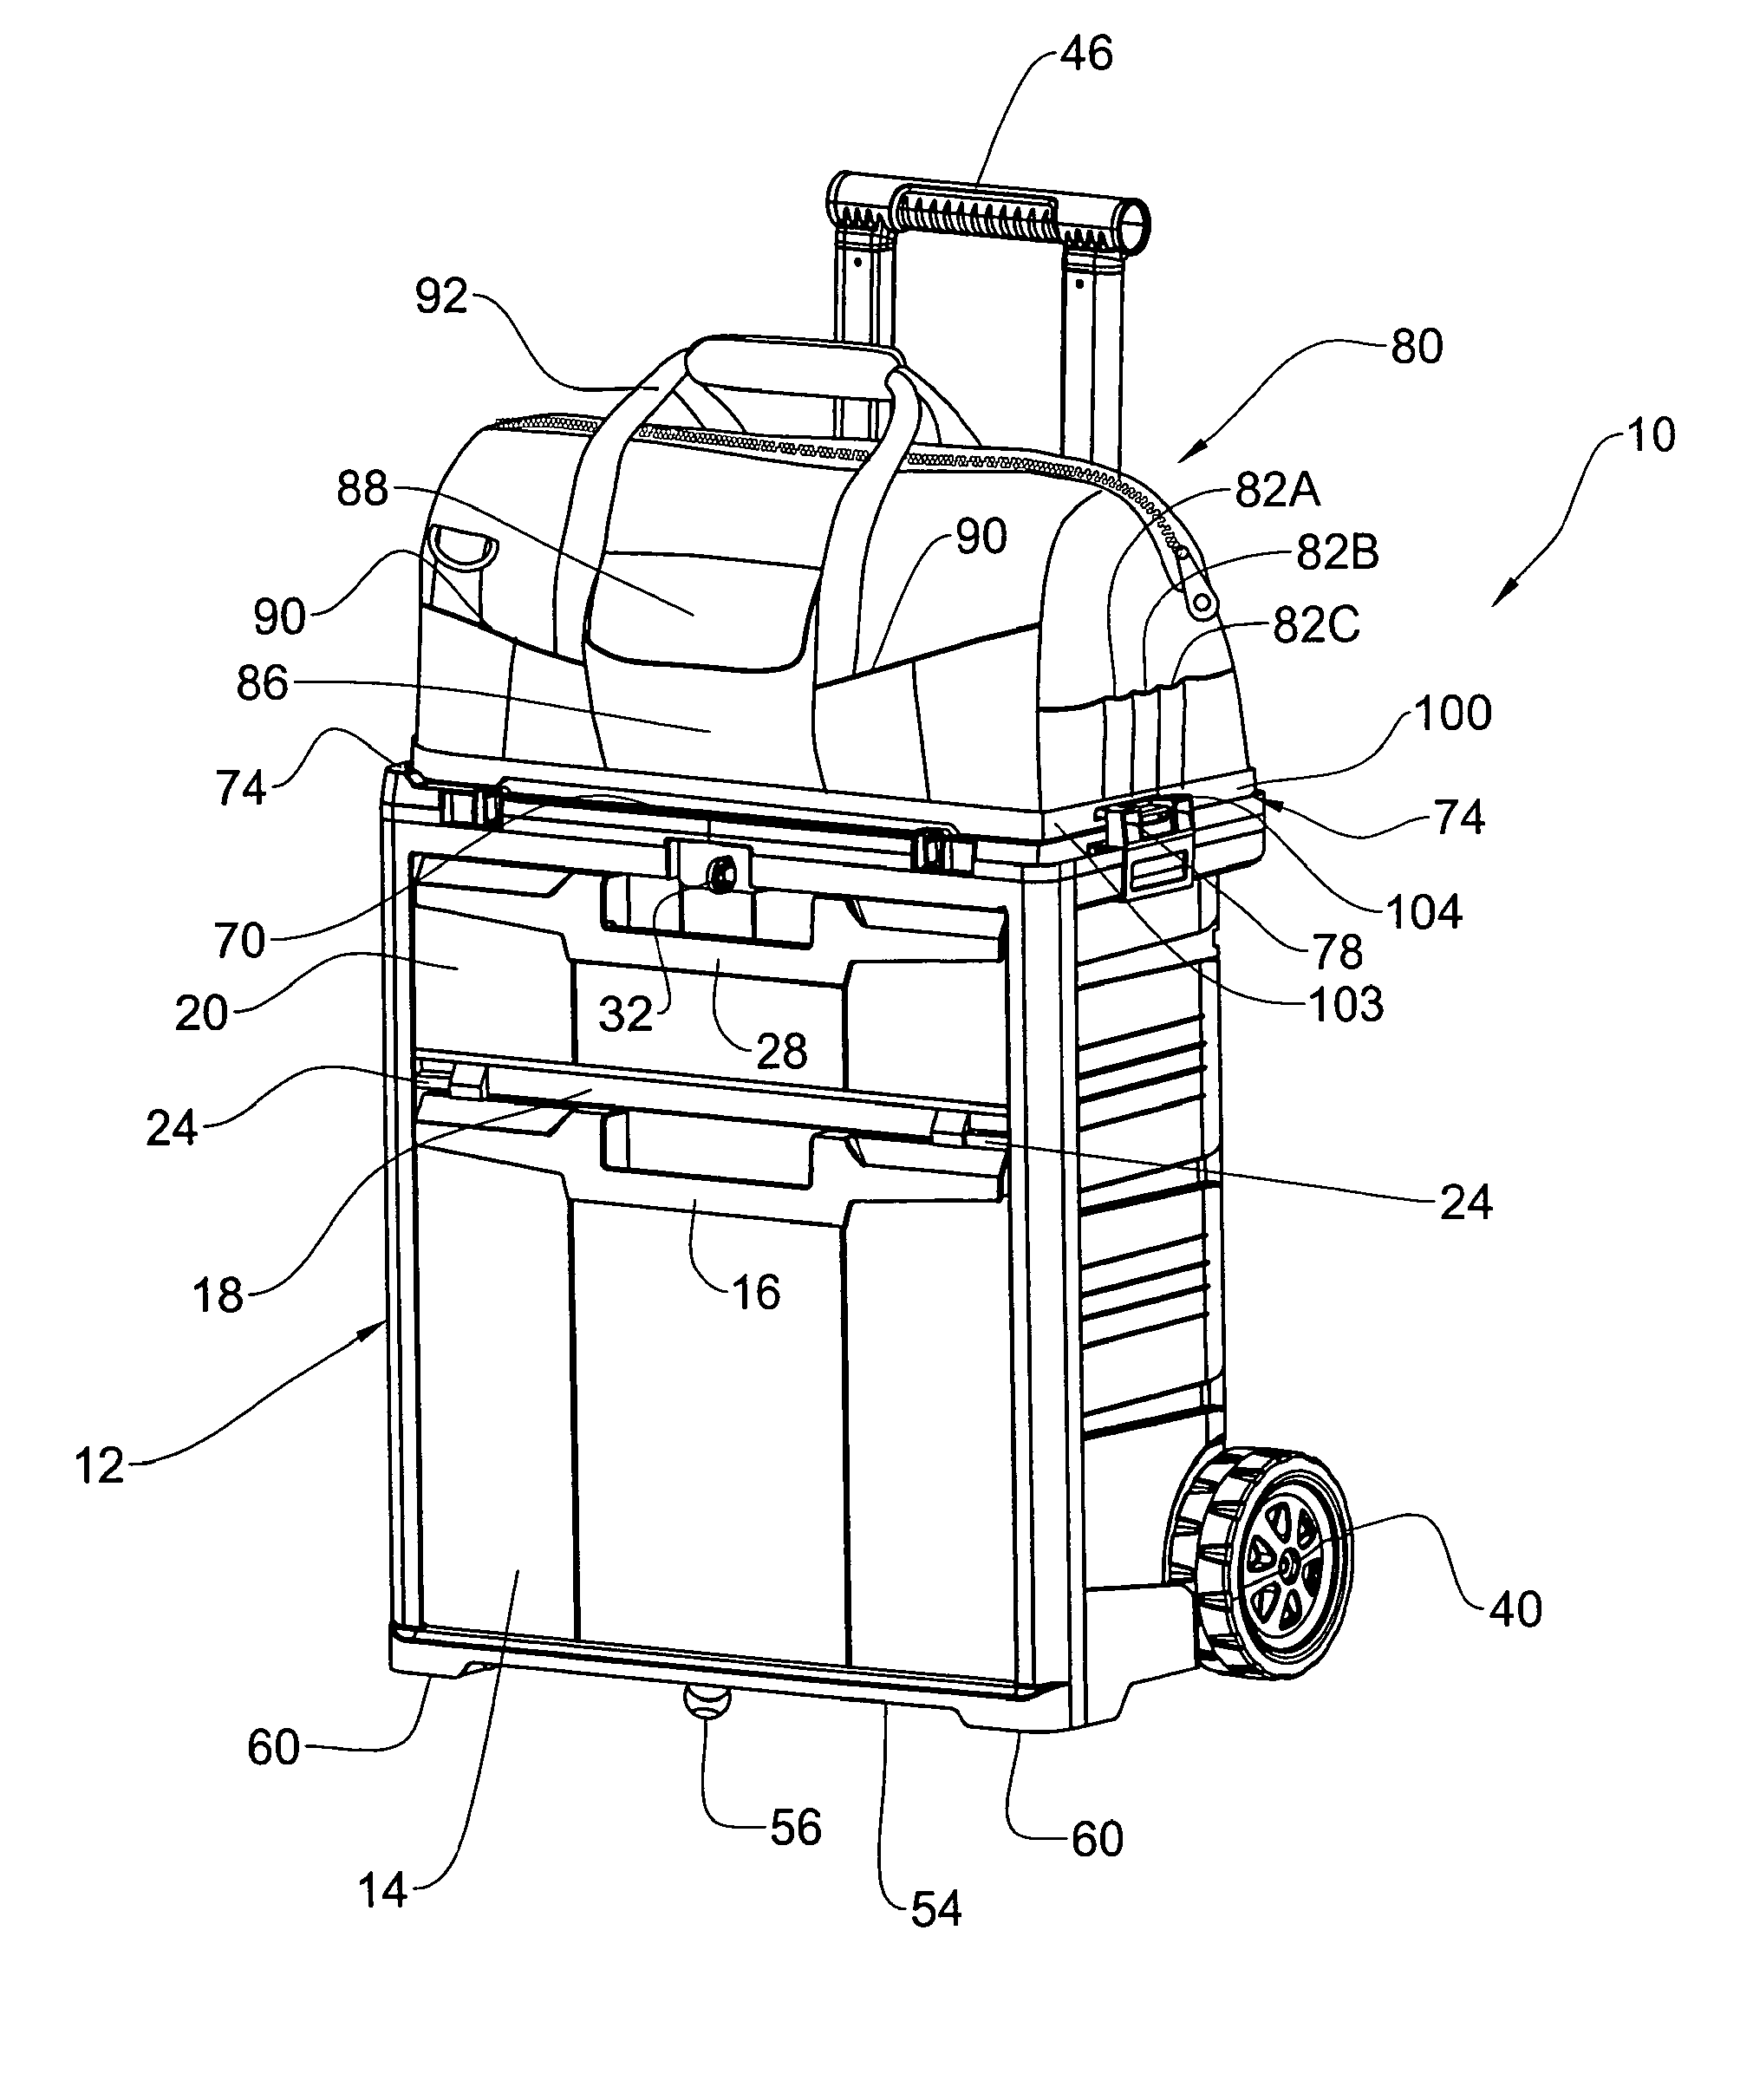 Portable container assembly